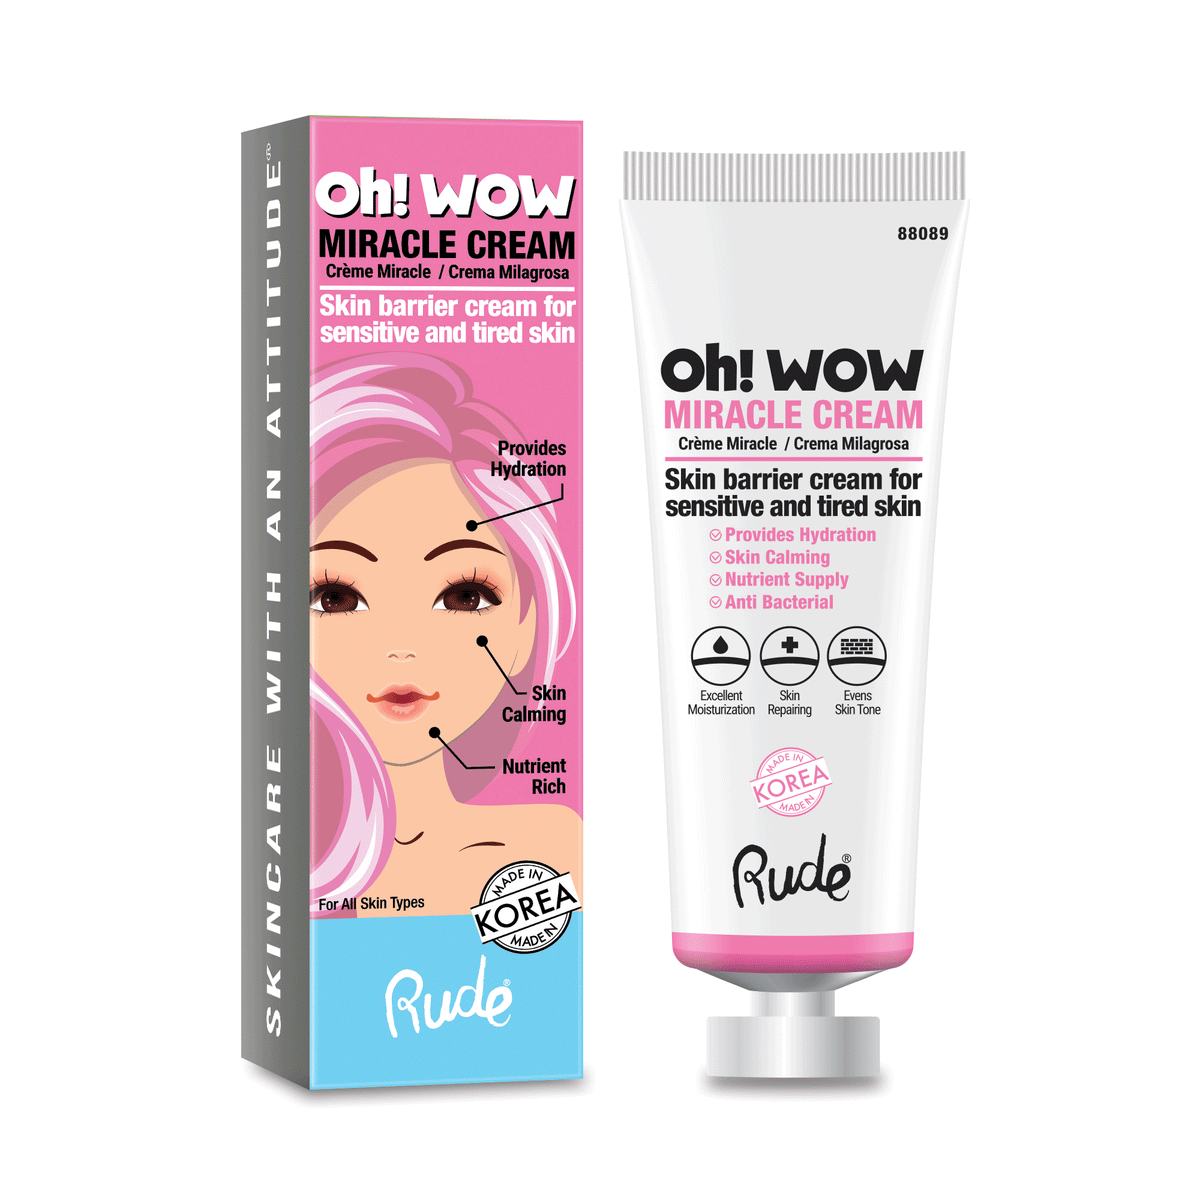 Oh Wow! Miracle Cream